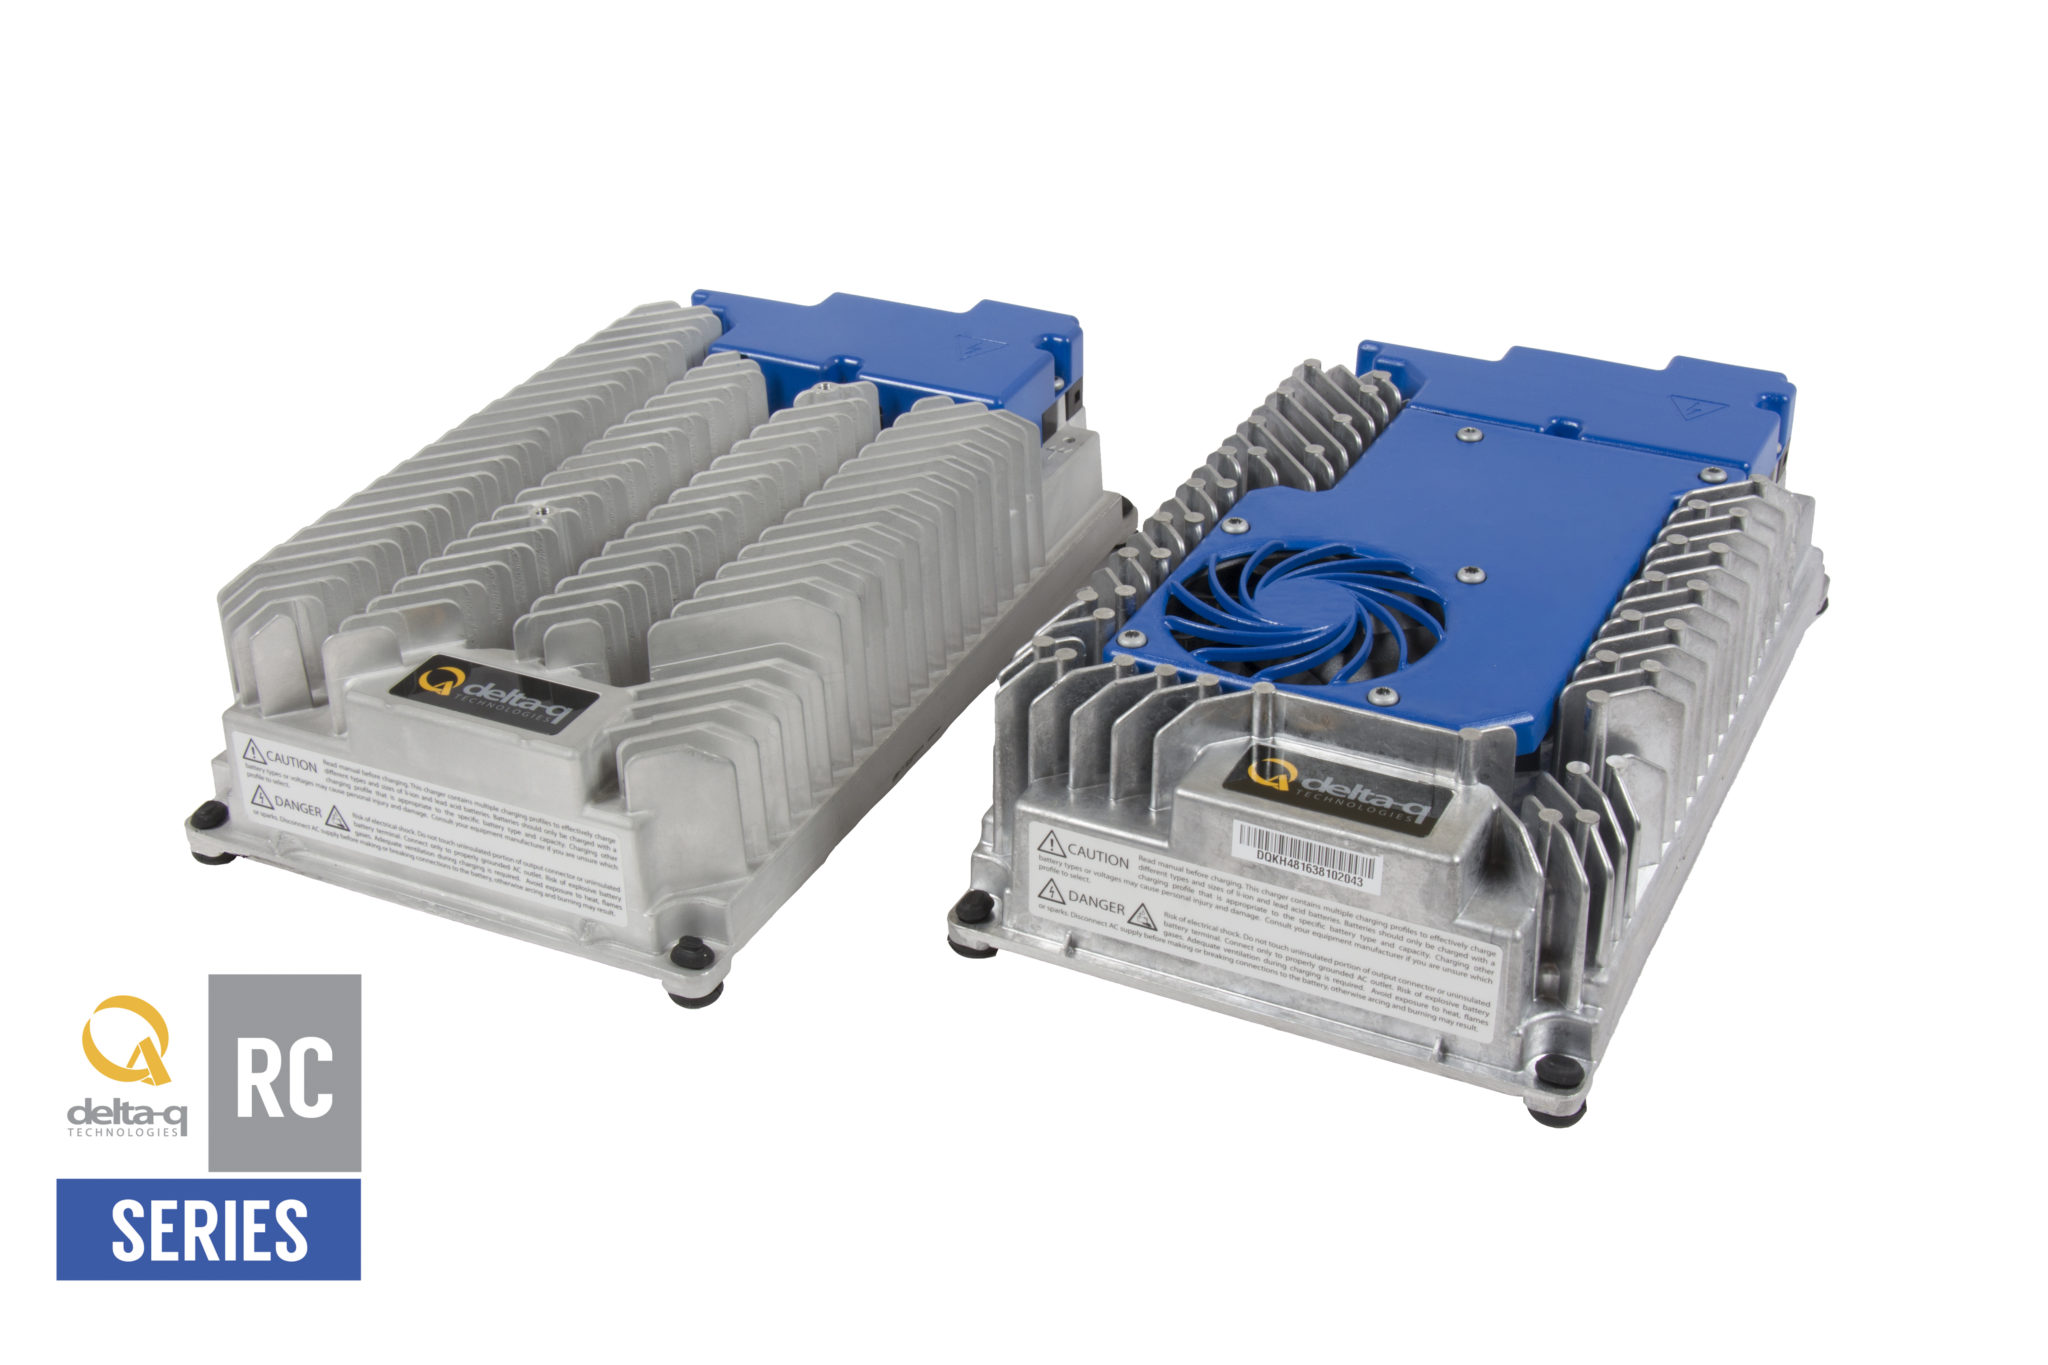 Delta-Q Technologies Introduces New RC Series Industrial Battery Chargers at ISSA/Interclean